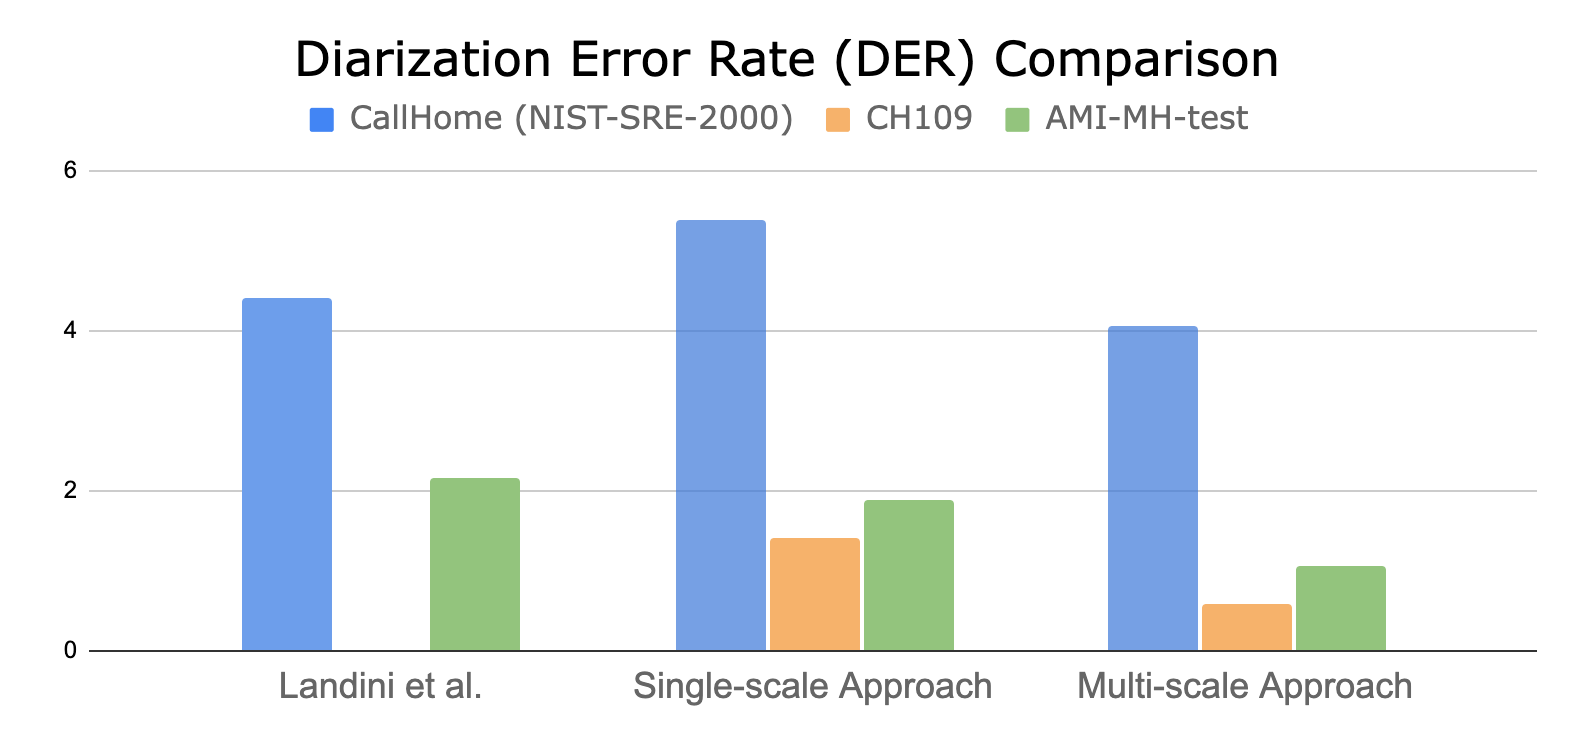 Bar plots showing diarization error rate for three different datasets. Left, “Landini et al”, shows 4.4% for CallHome and 2.2 % for AMI-MH-test. Middle, “Single-scale approach” shows 5.3%, 1.5%, 1.8% for CallHome, CH109, AMI-MH-test, respectively. Farthest right, “Multi-scale Approach” shows 4.0%, 0.6%, 1.1%  for CallHome, CH109, AMI-MH-test, respectively.